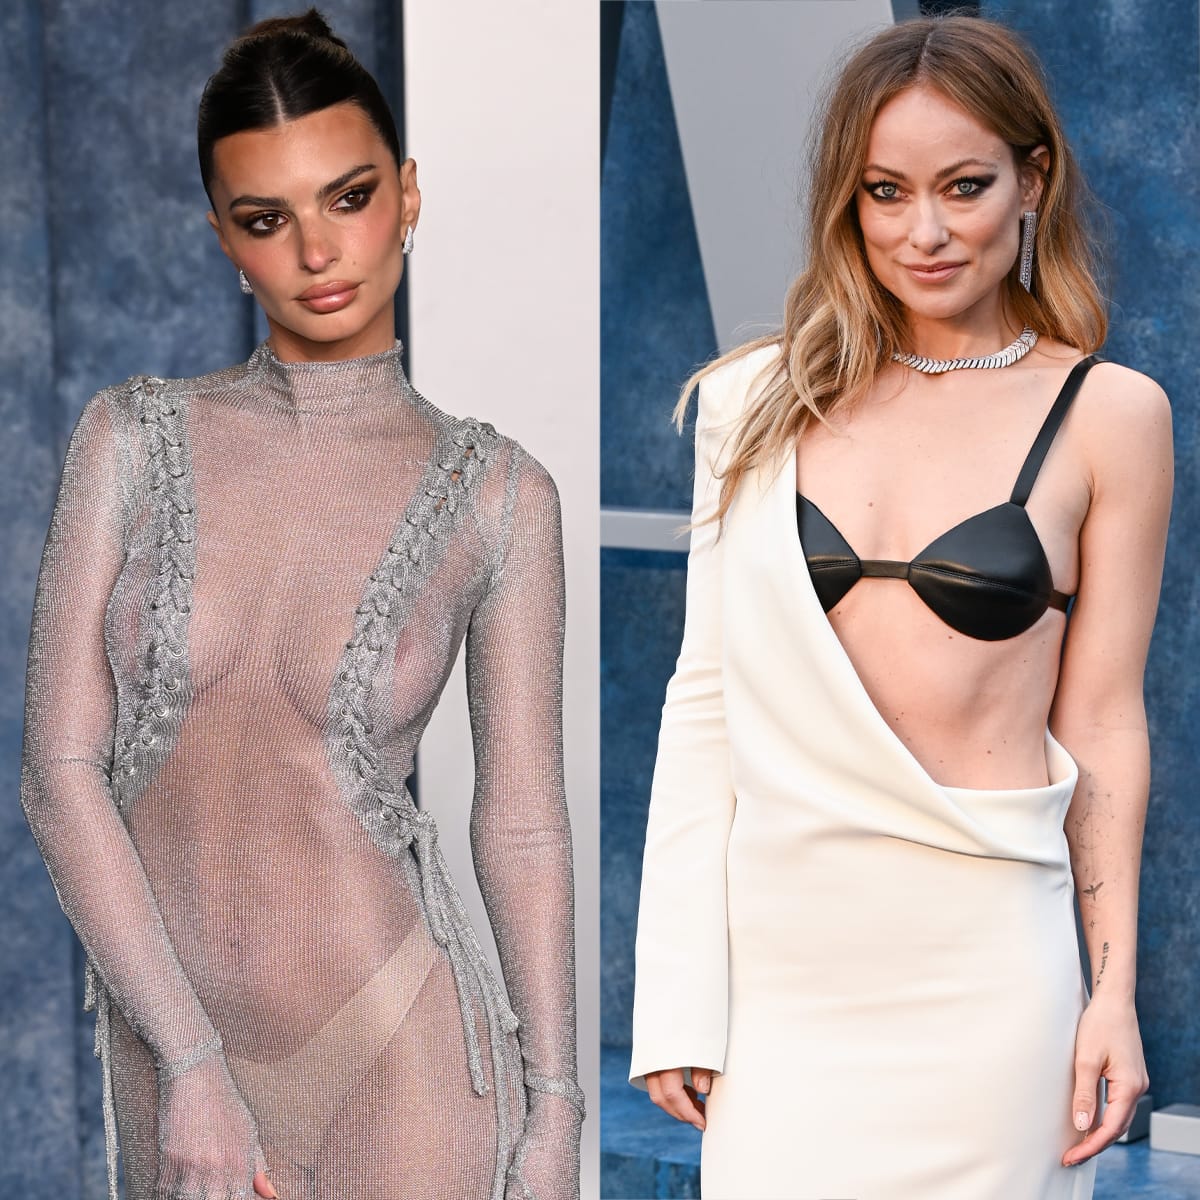 Emily Ratajkowski and Olivia Wilde were seen mingling at the 2023 Vanity Fair Oscar Party in February 2023